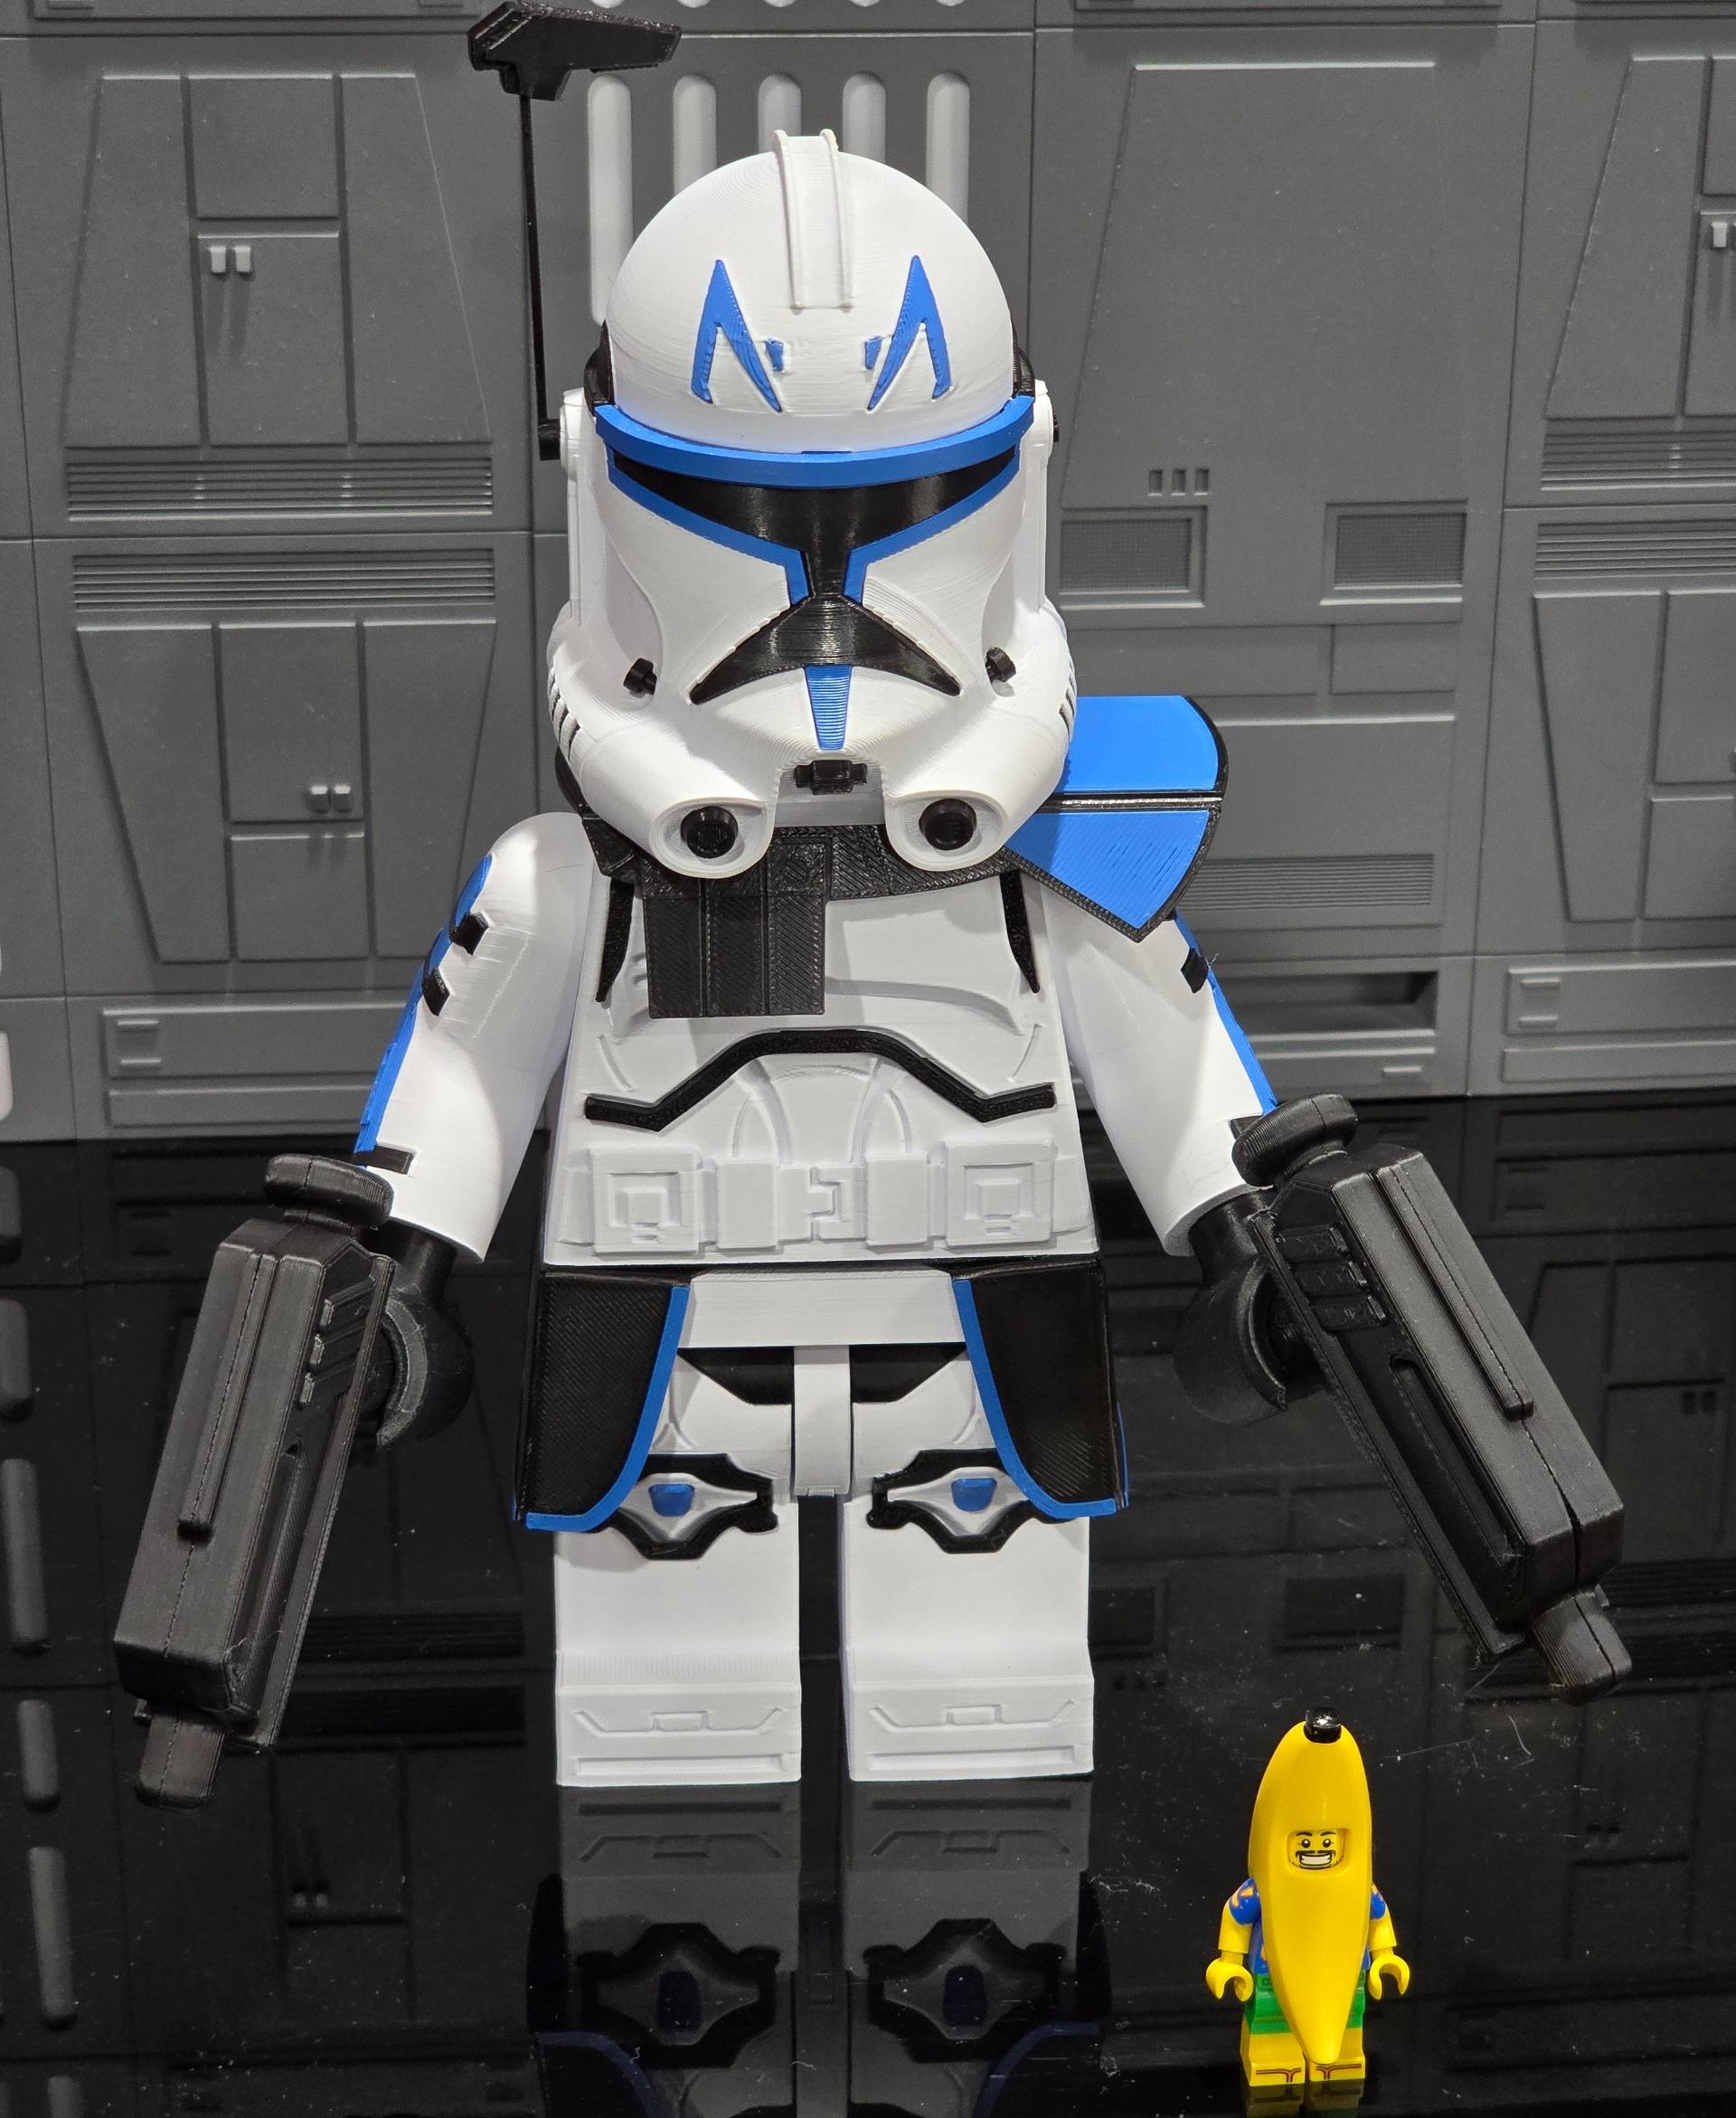 Captain Rex (9 inch brick figure, NO MMU/AMS, NO supports, NO glue) - "Yes, I know both Crunch and Kirk. All the captains know each other, but not all are Star Wars LEGO captains. Banana for scale." - 3d model